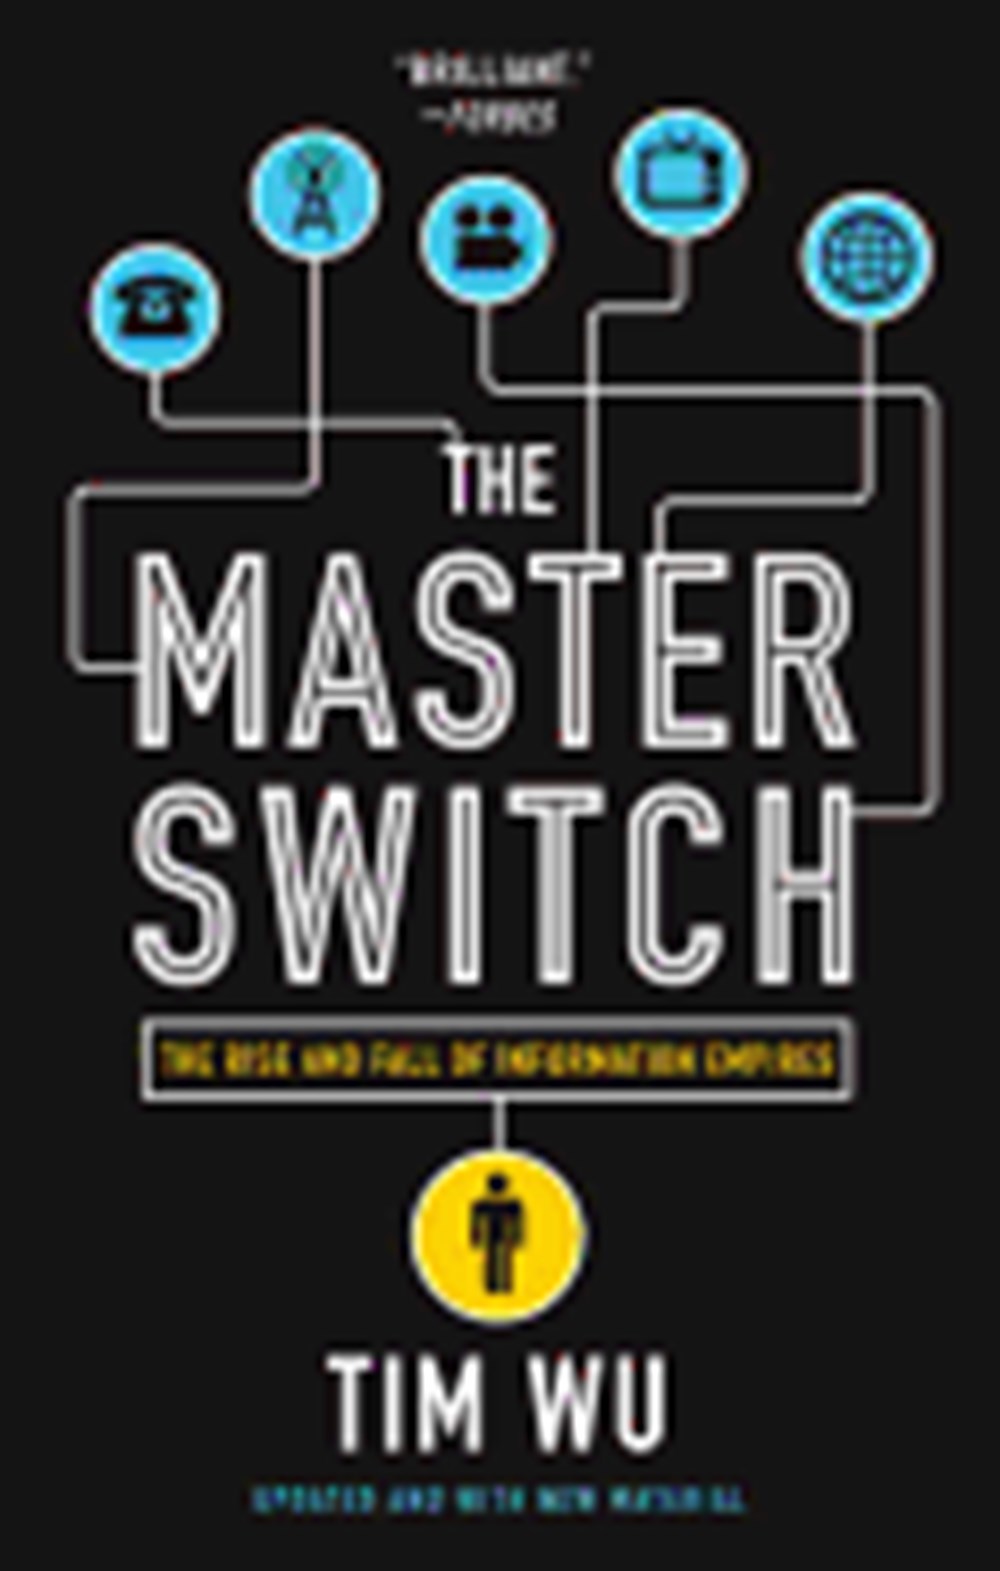 Master Switch The Rise and Fall of Information Empires